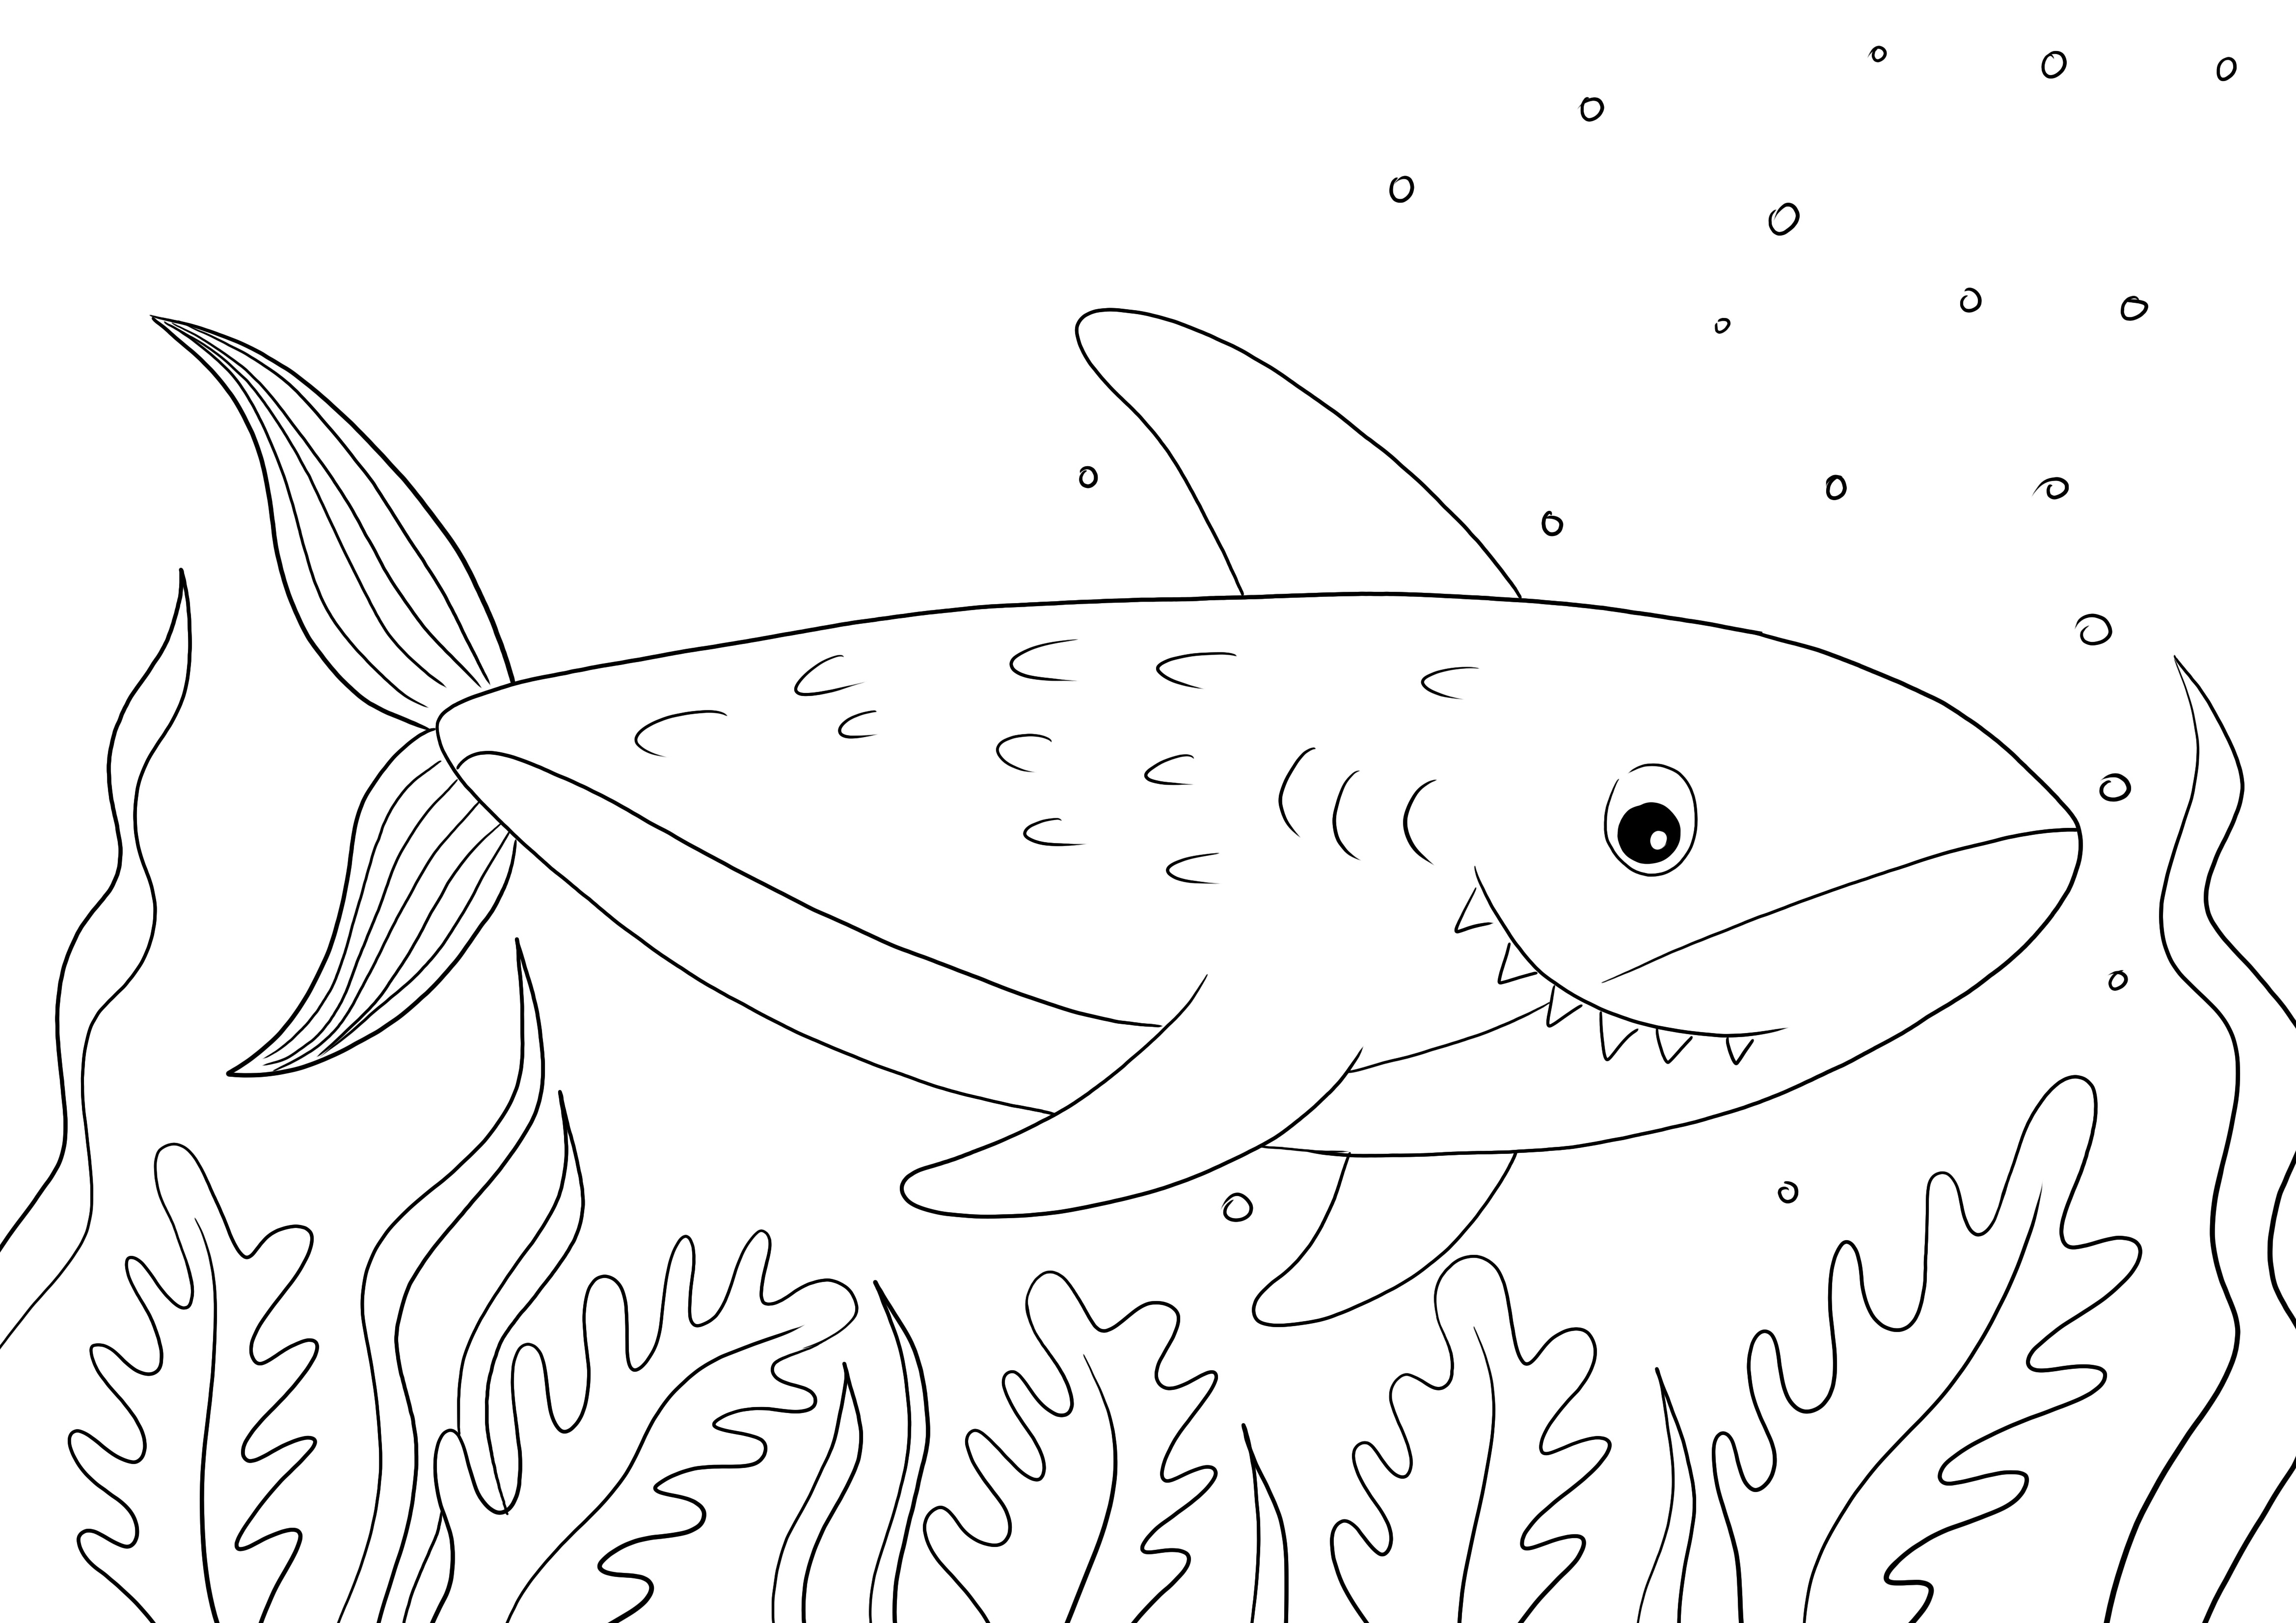 Easy and free printing of a Shark coloring page for kids to learn about sea animals